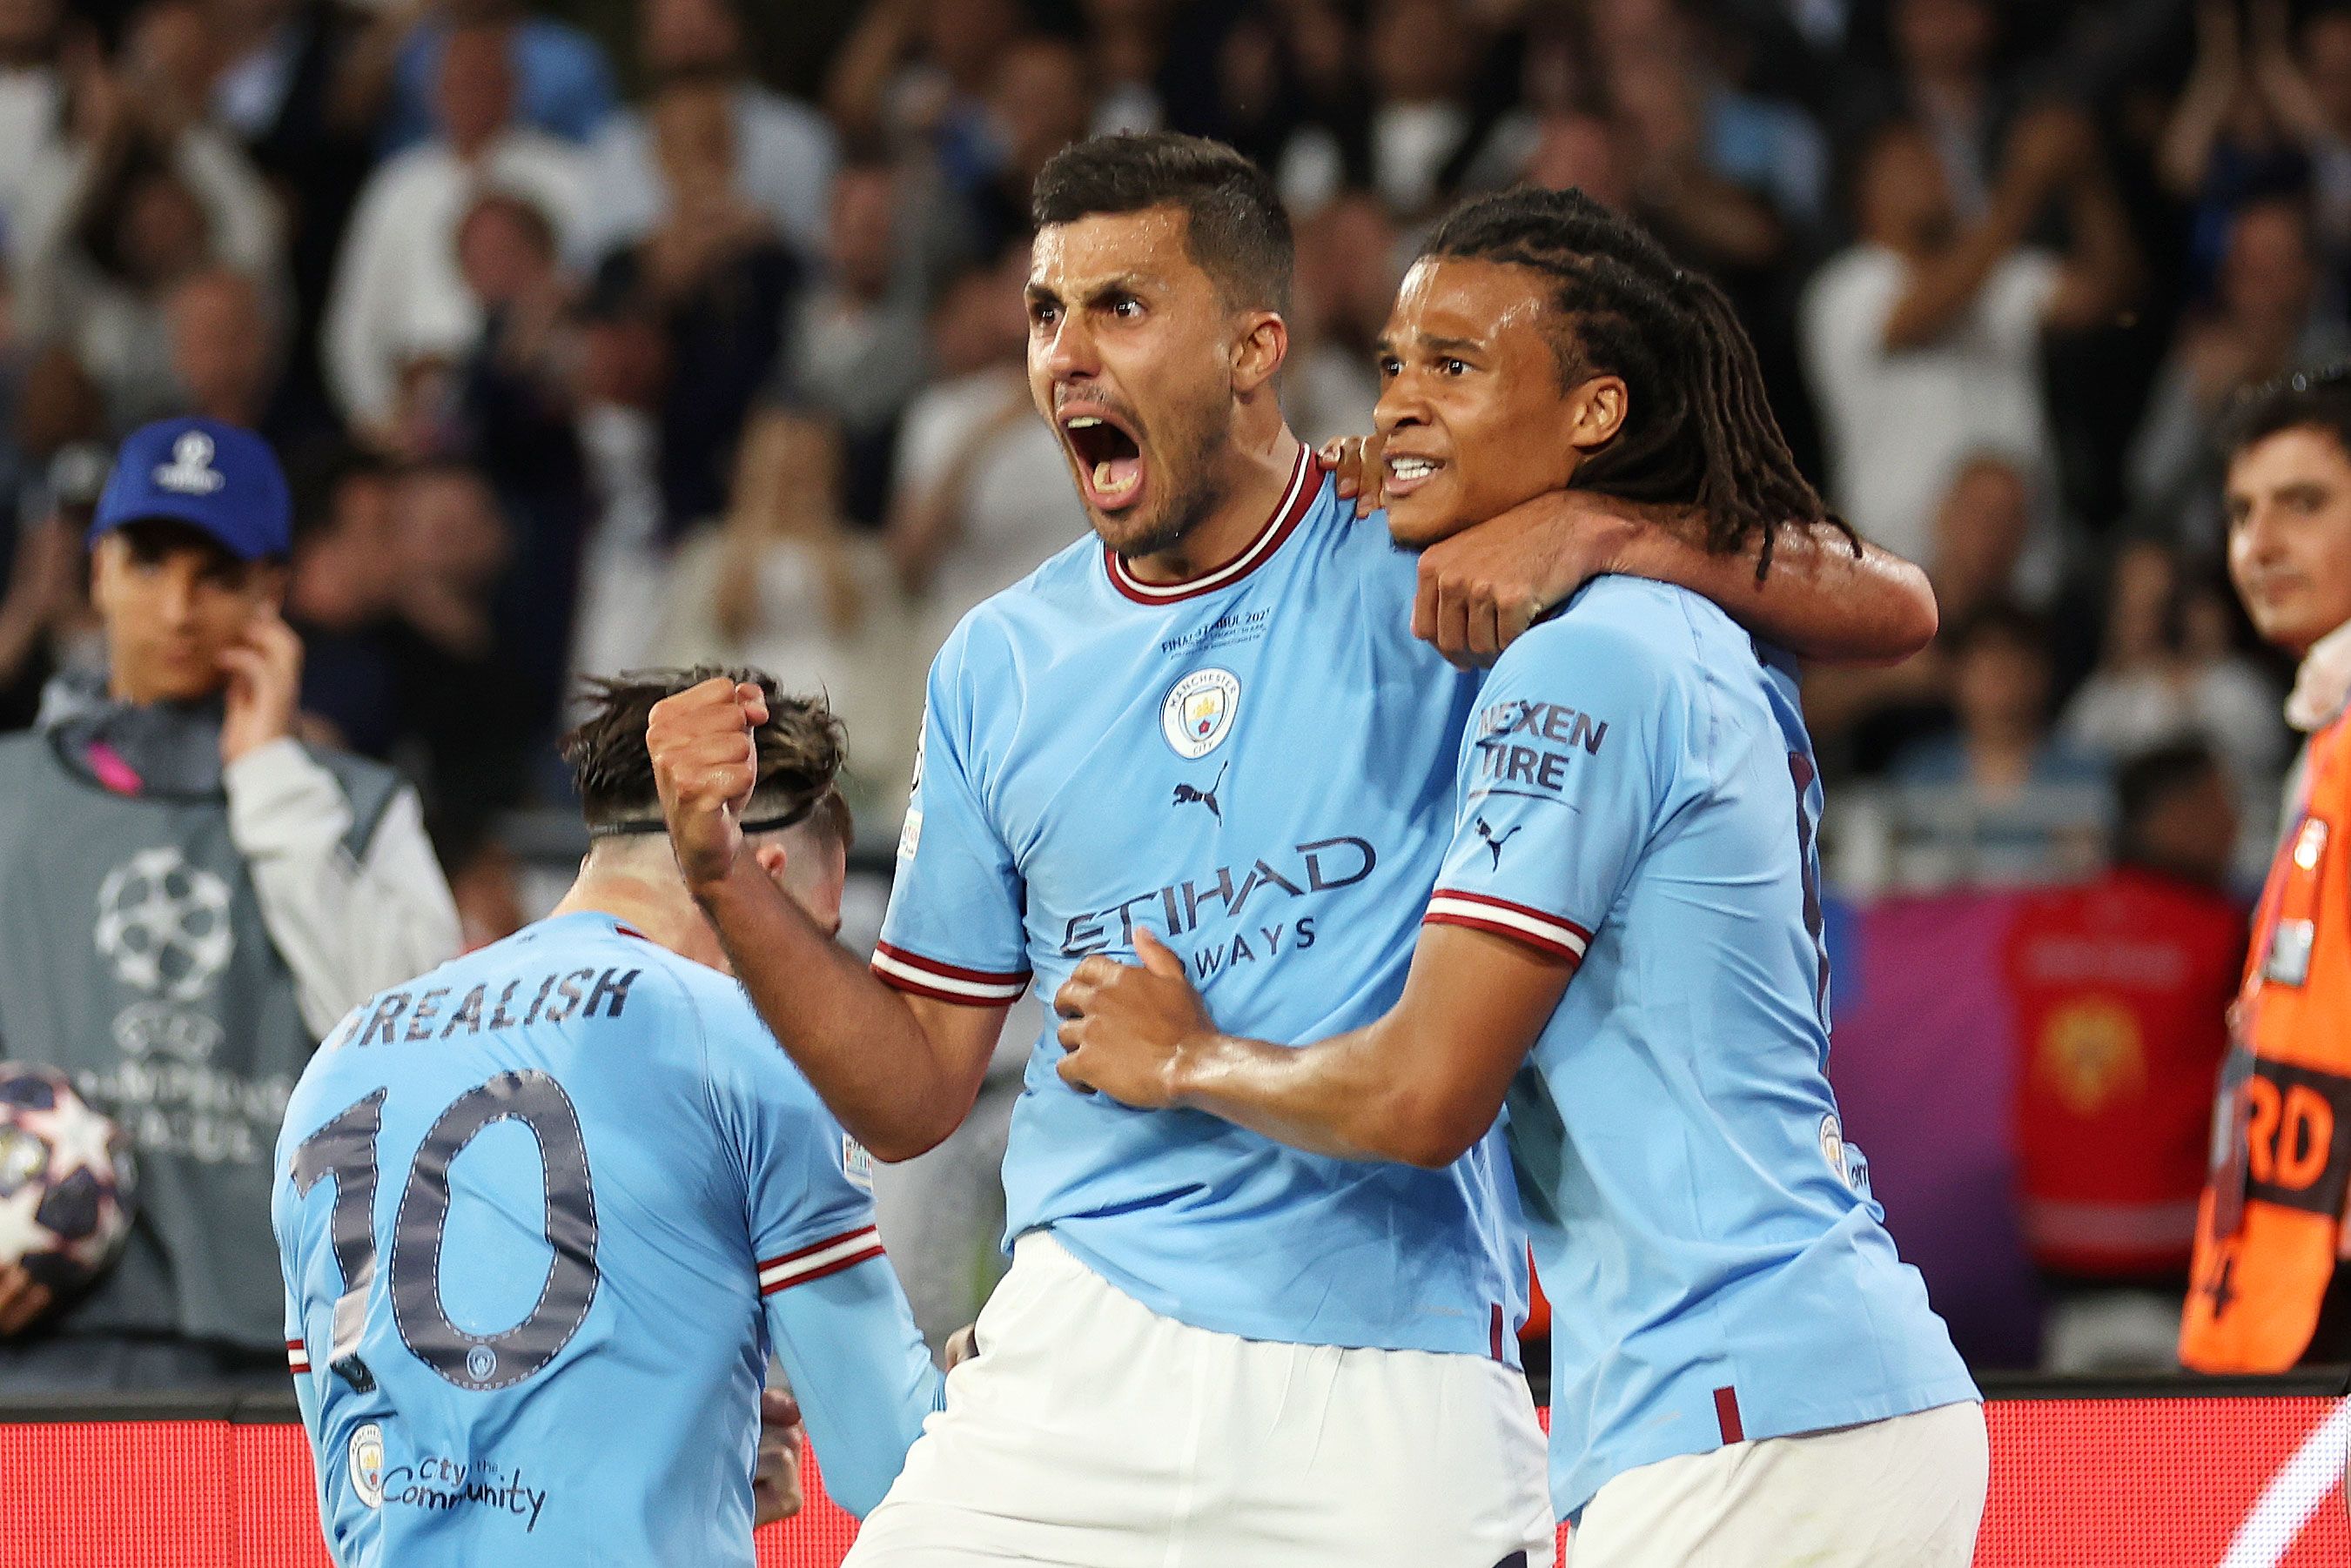 Manchester City wins Champions League for first time, beating